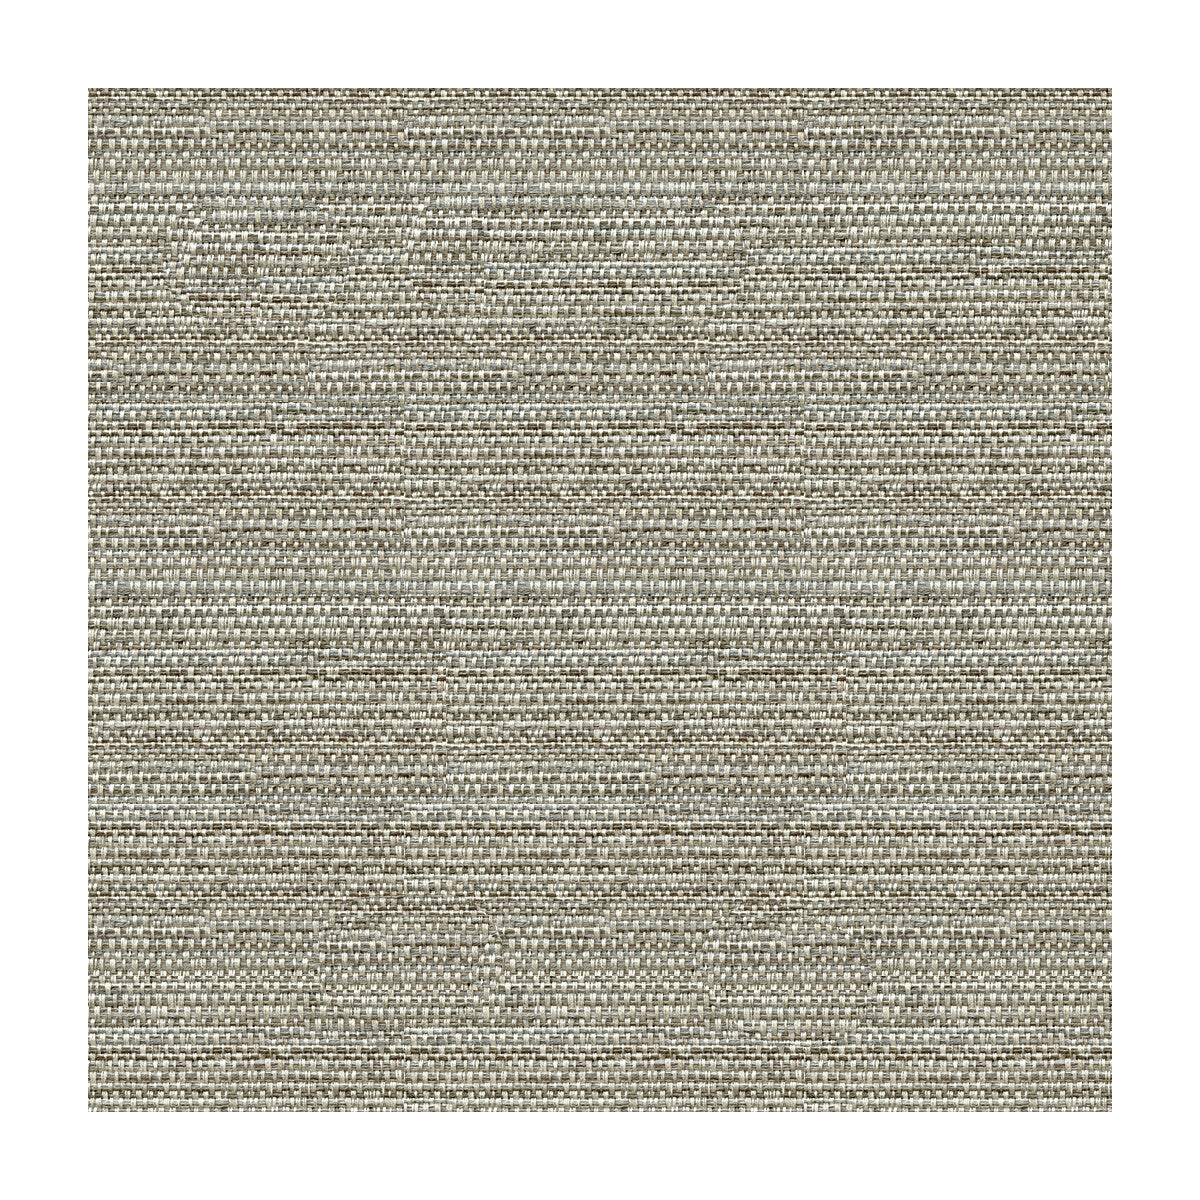 Helm fabric in pebble color - pattern 34869.11.0 - by Kravet Design in the Oceania Indoor Outdoor collection